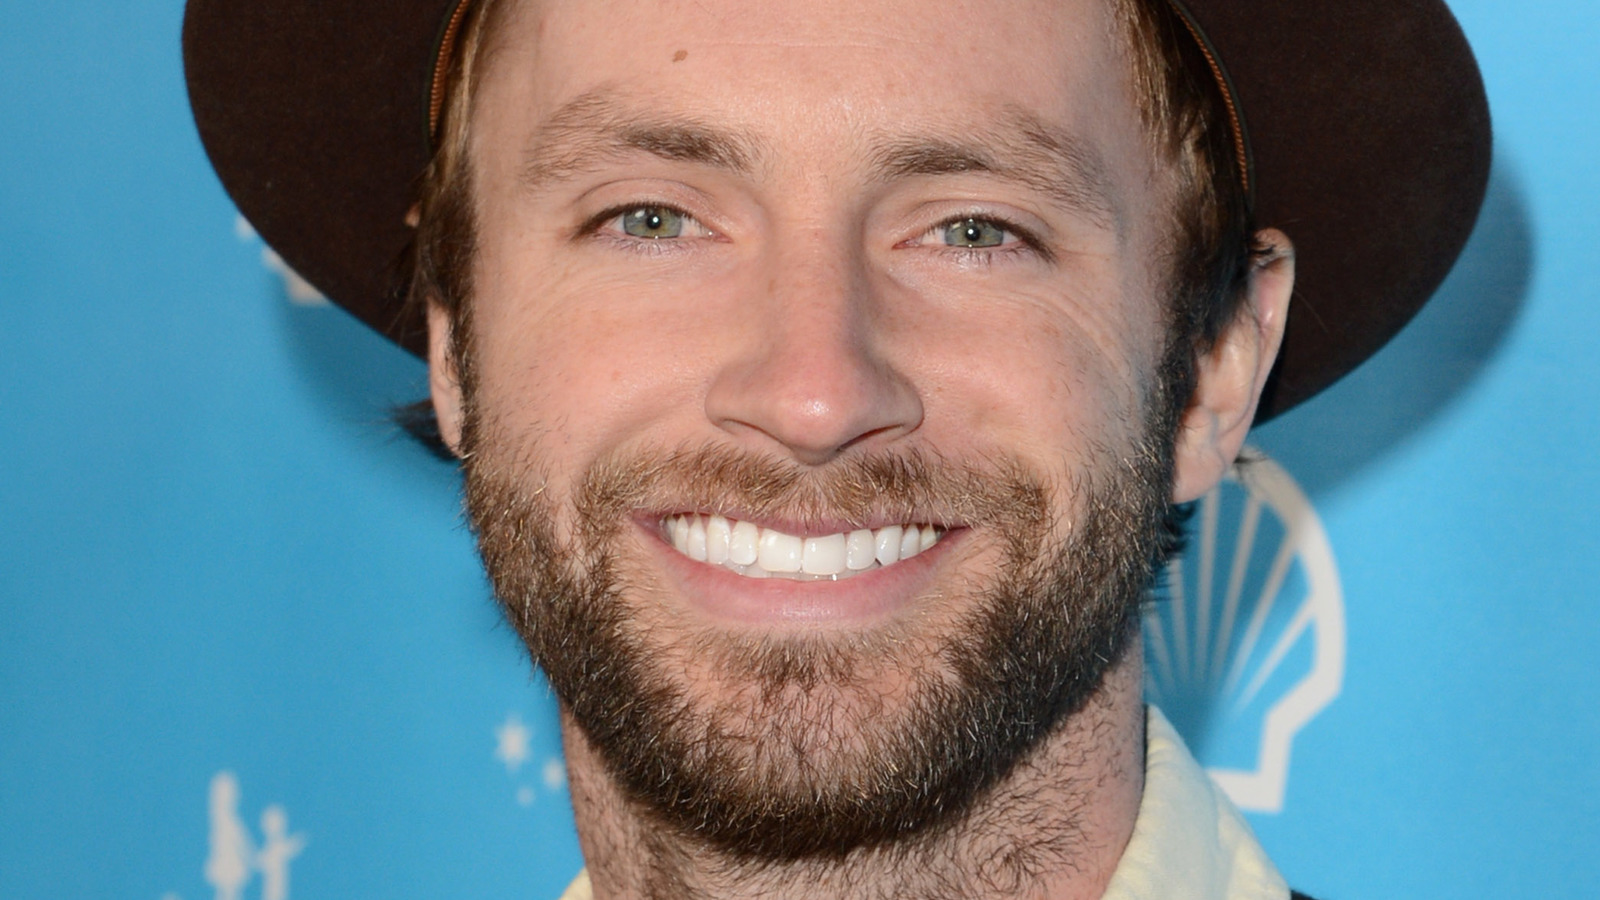 stribet Messing Roux Whatever Happened To Paul McDonald From American Idol?